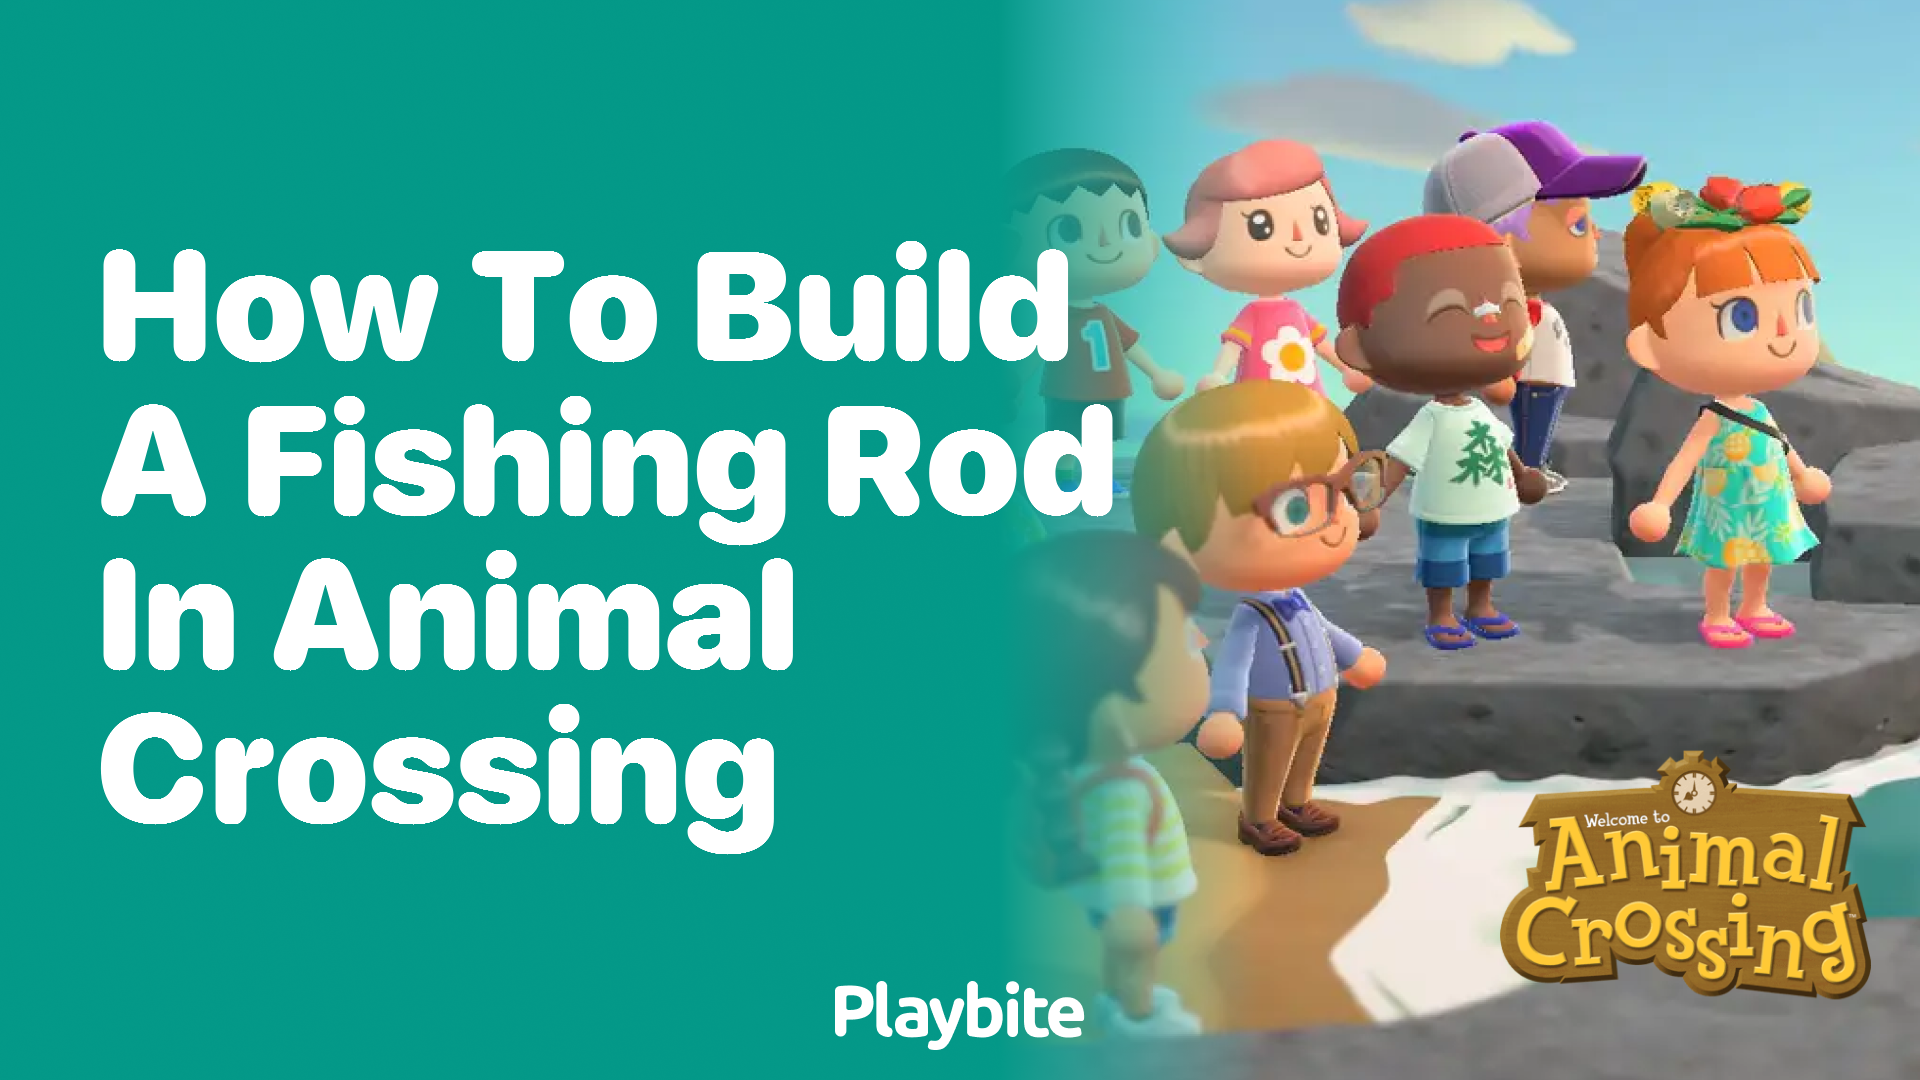 How to Build a Fishing Rod in Animal Crossing - Playbite